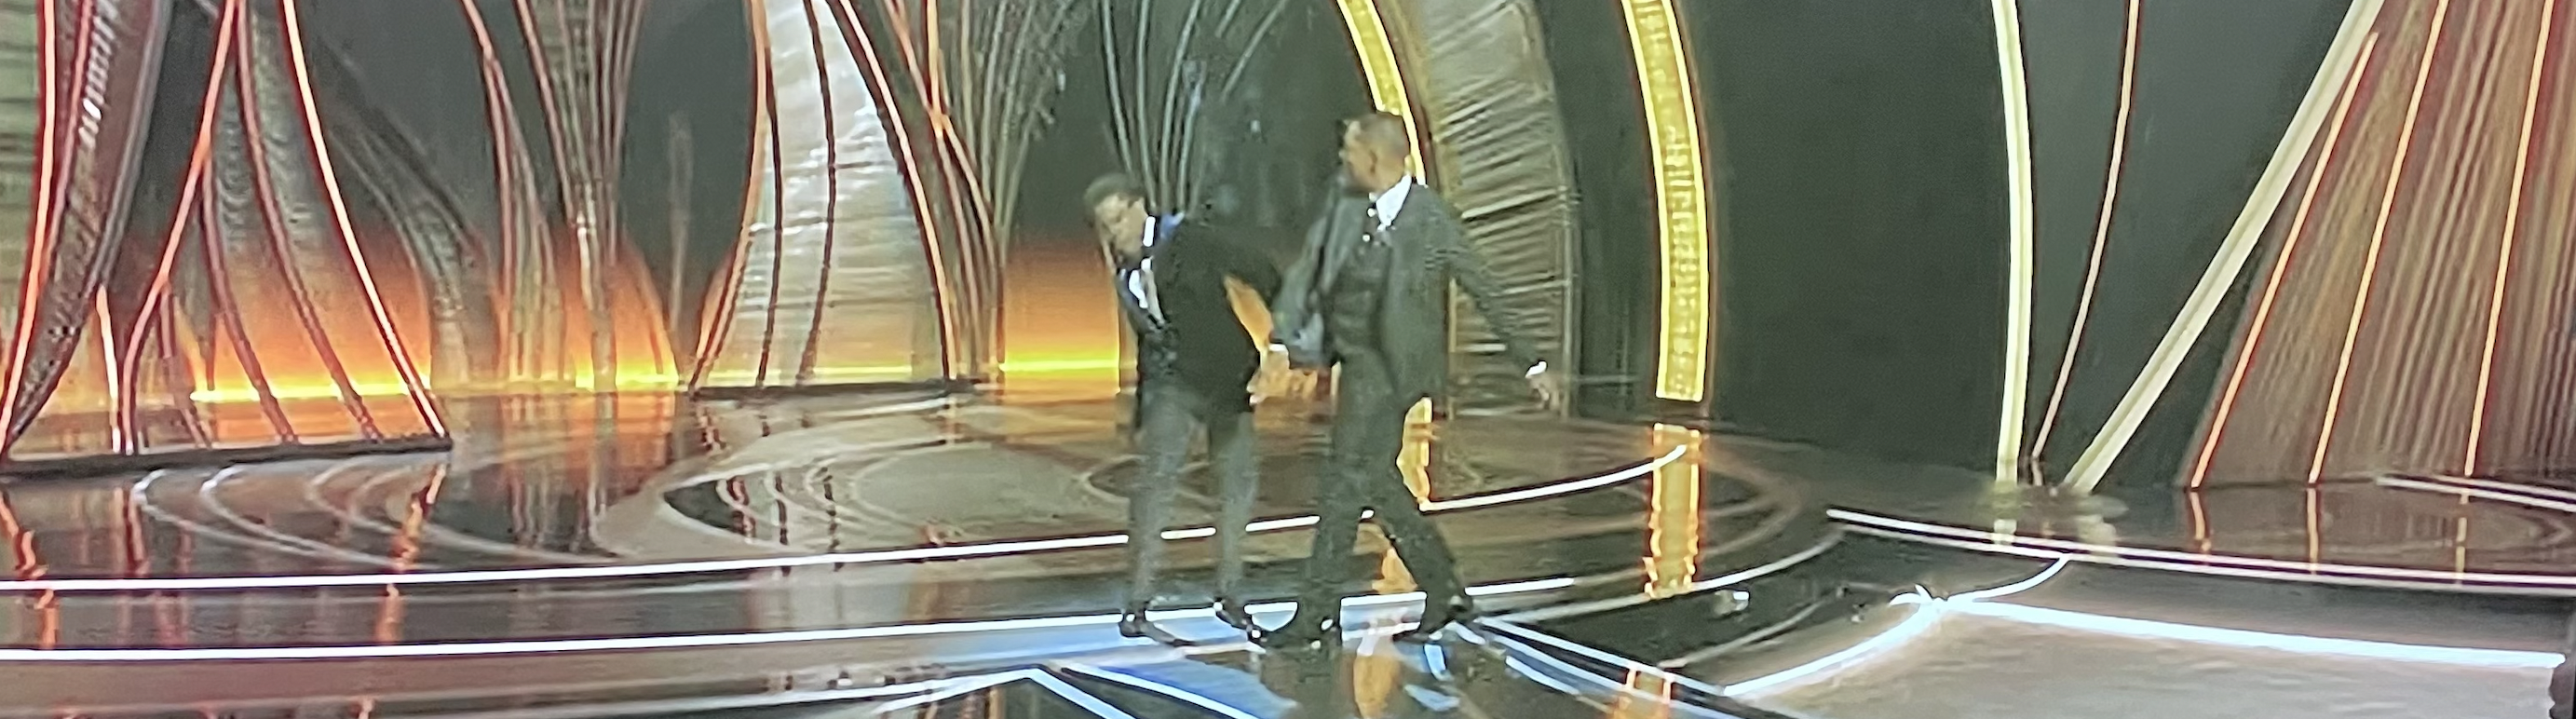 Wil Smith slapping comedian Chris Rock